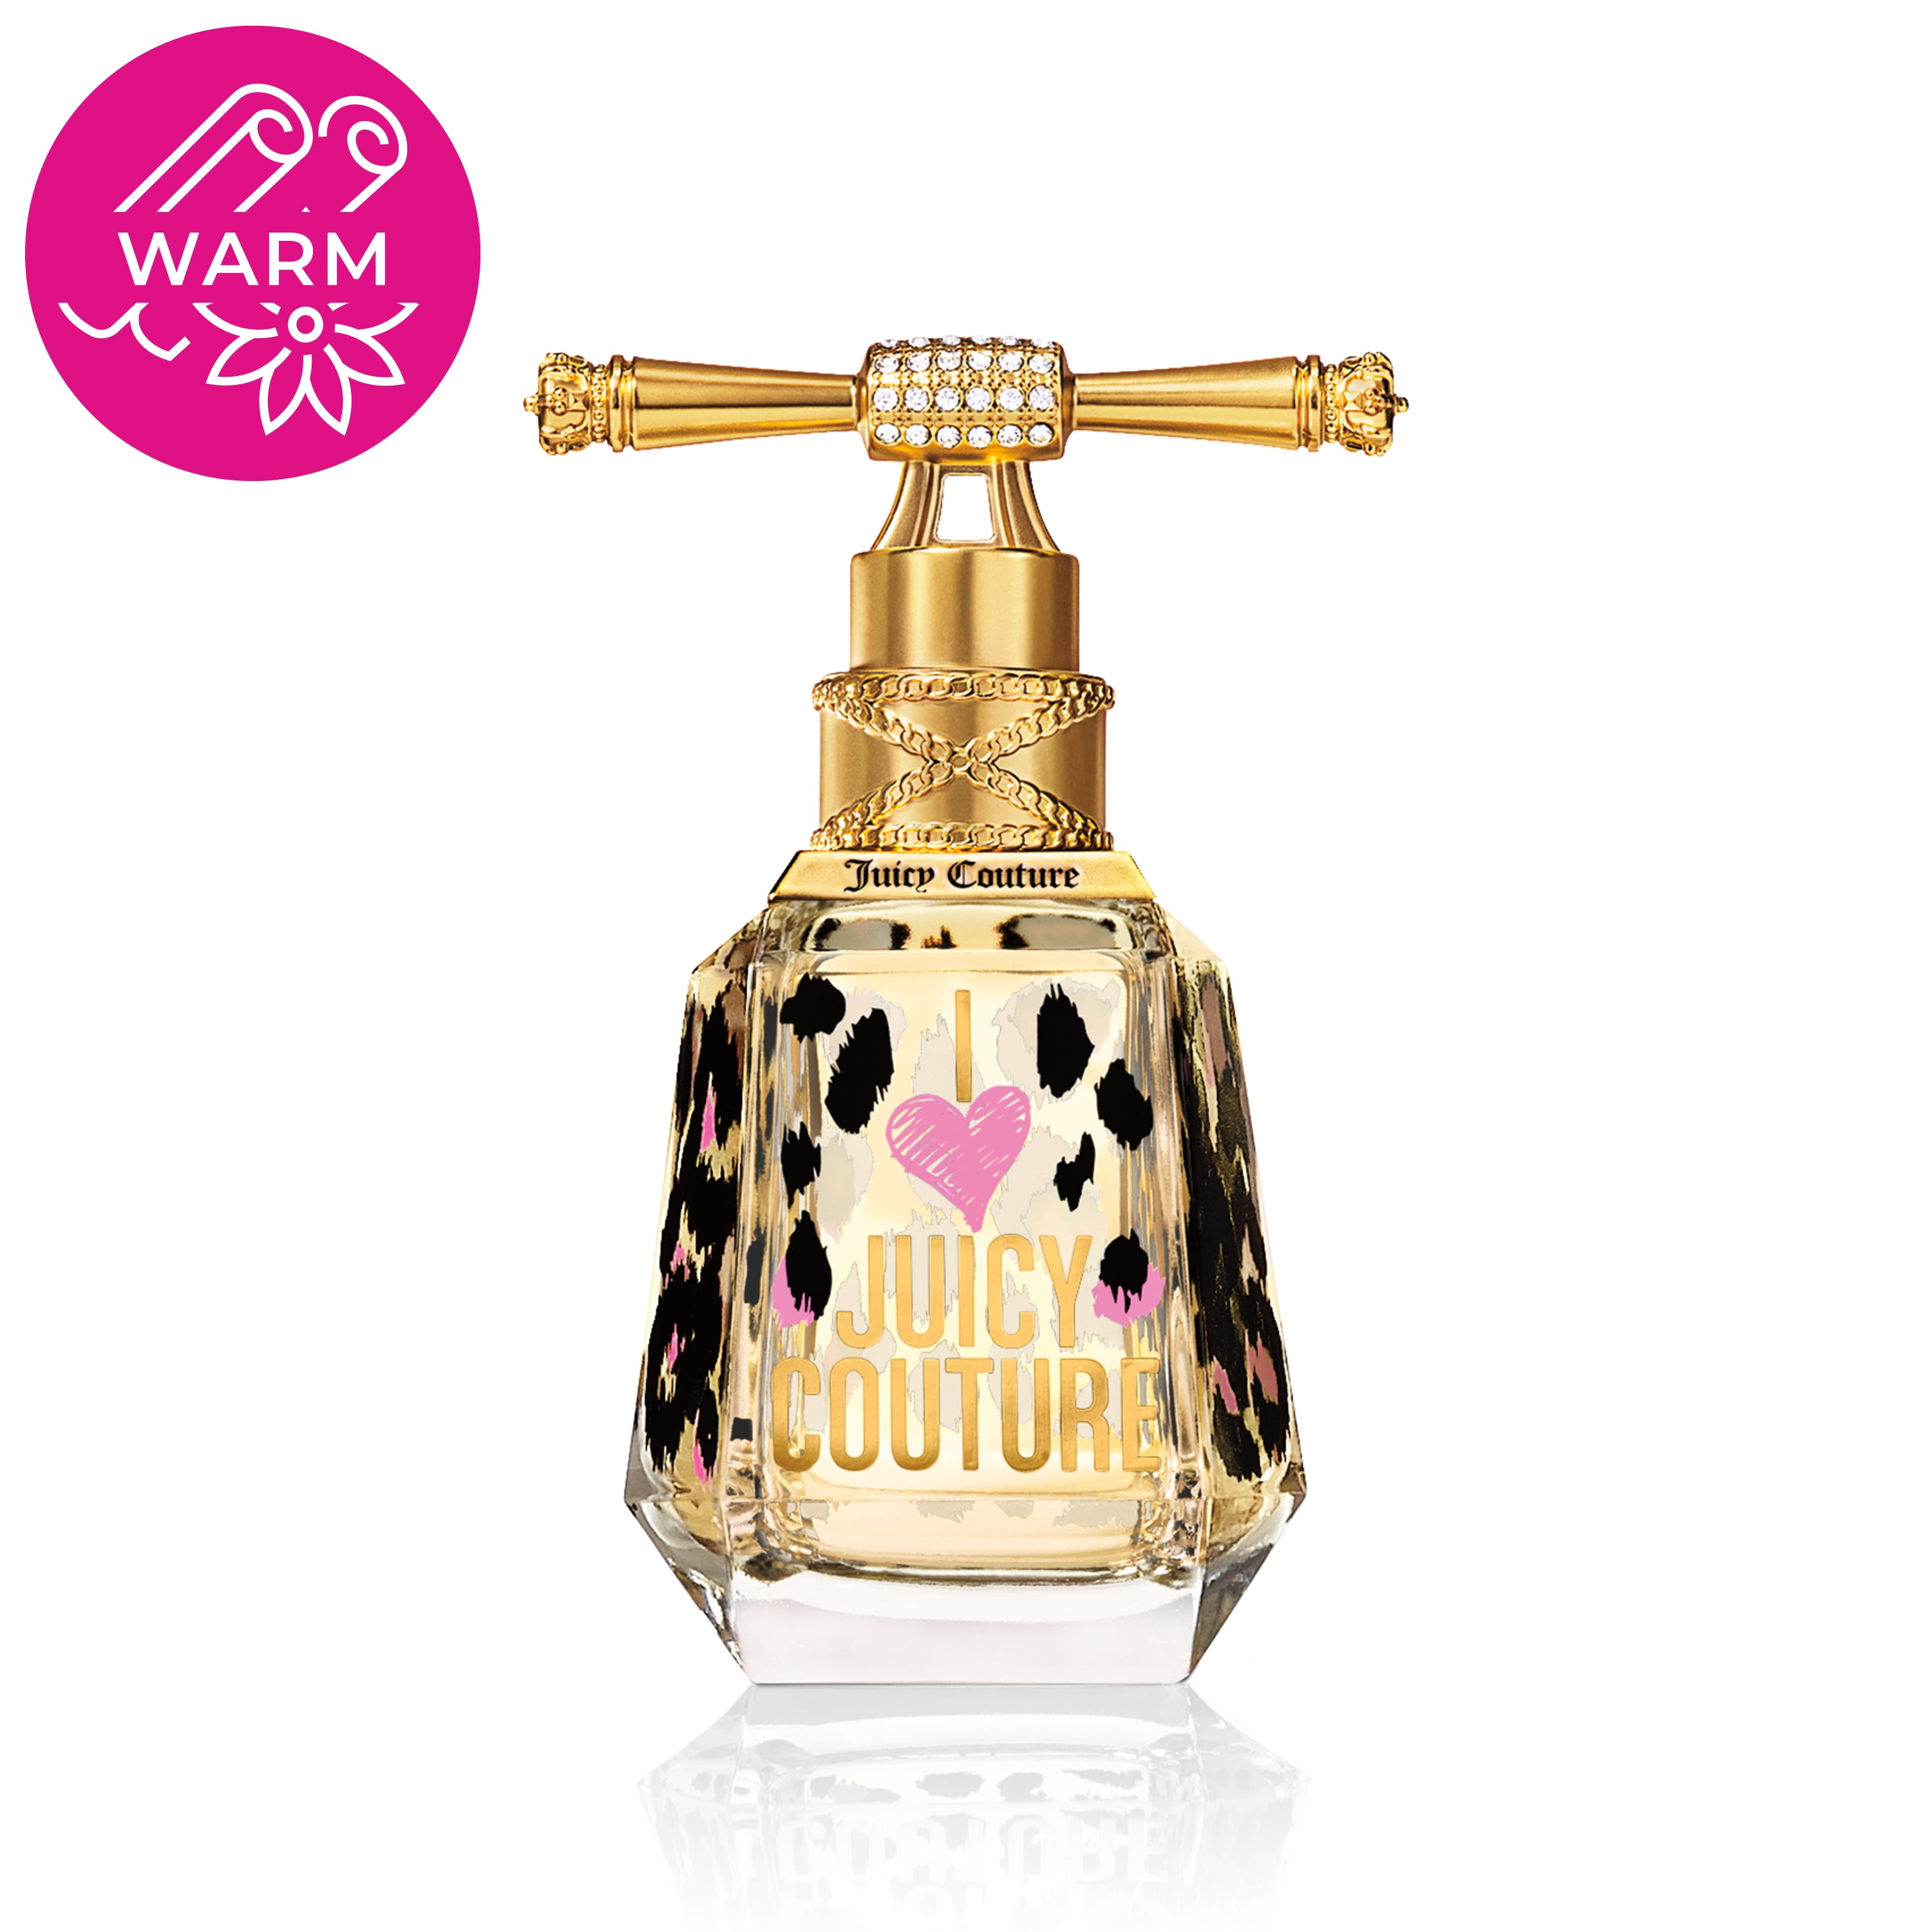 Juicy Couture I Love Juicy Couture, Perfume for Women, 1.7 fl. oz ...